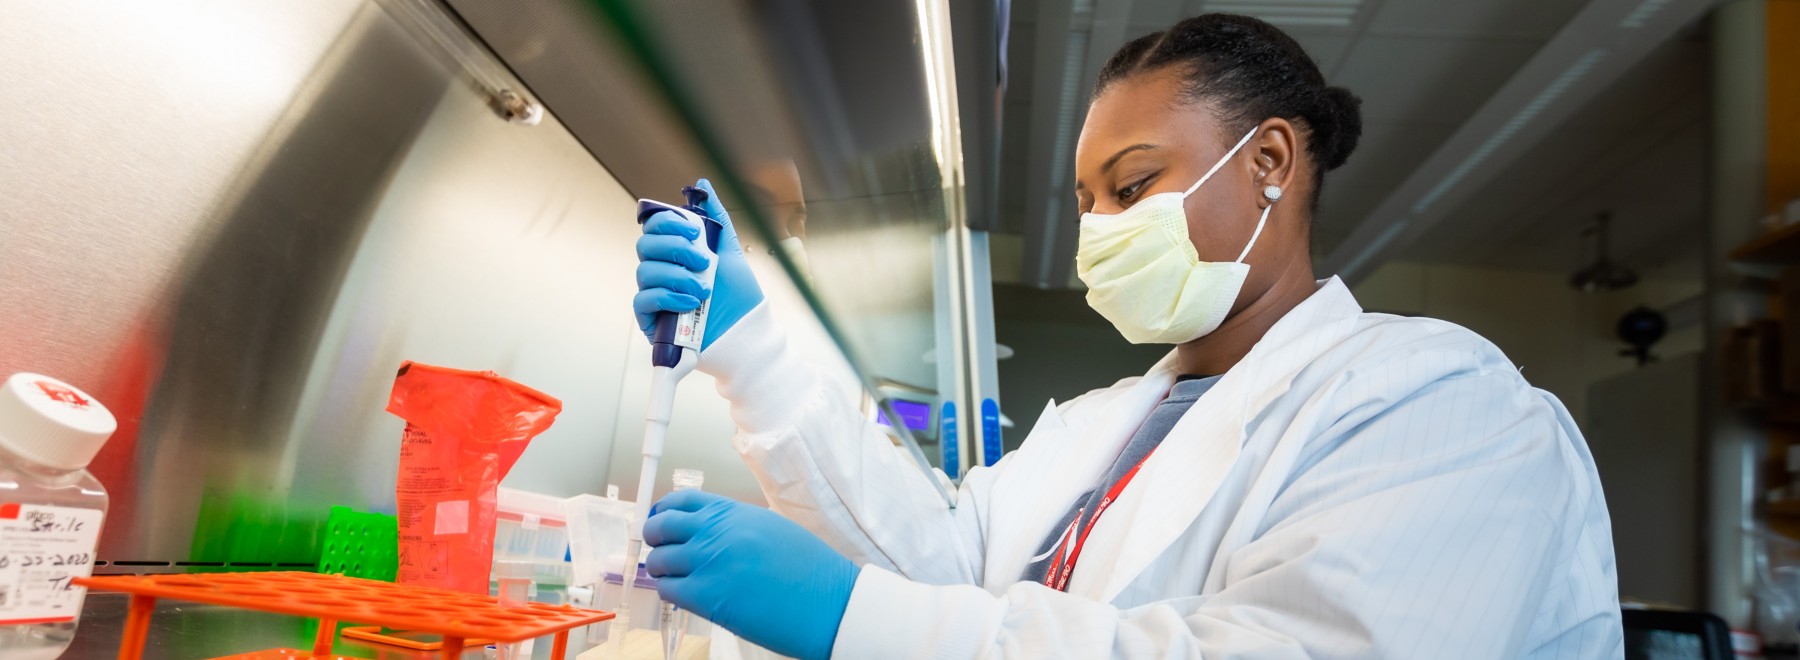 Diabetes project member conducts research in a lab.